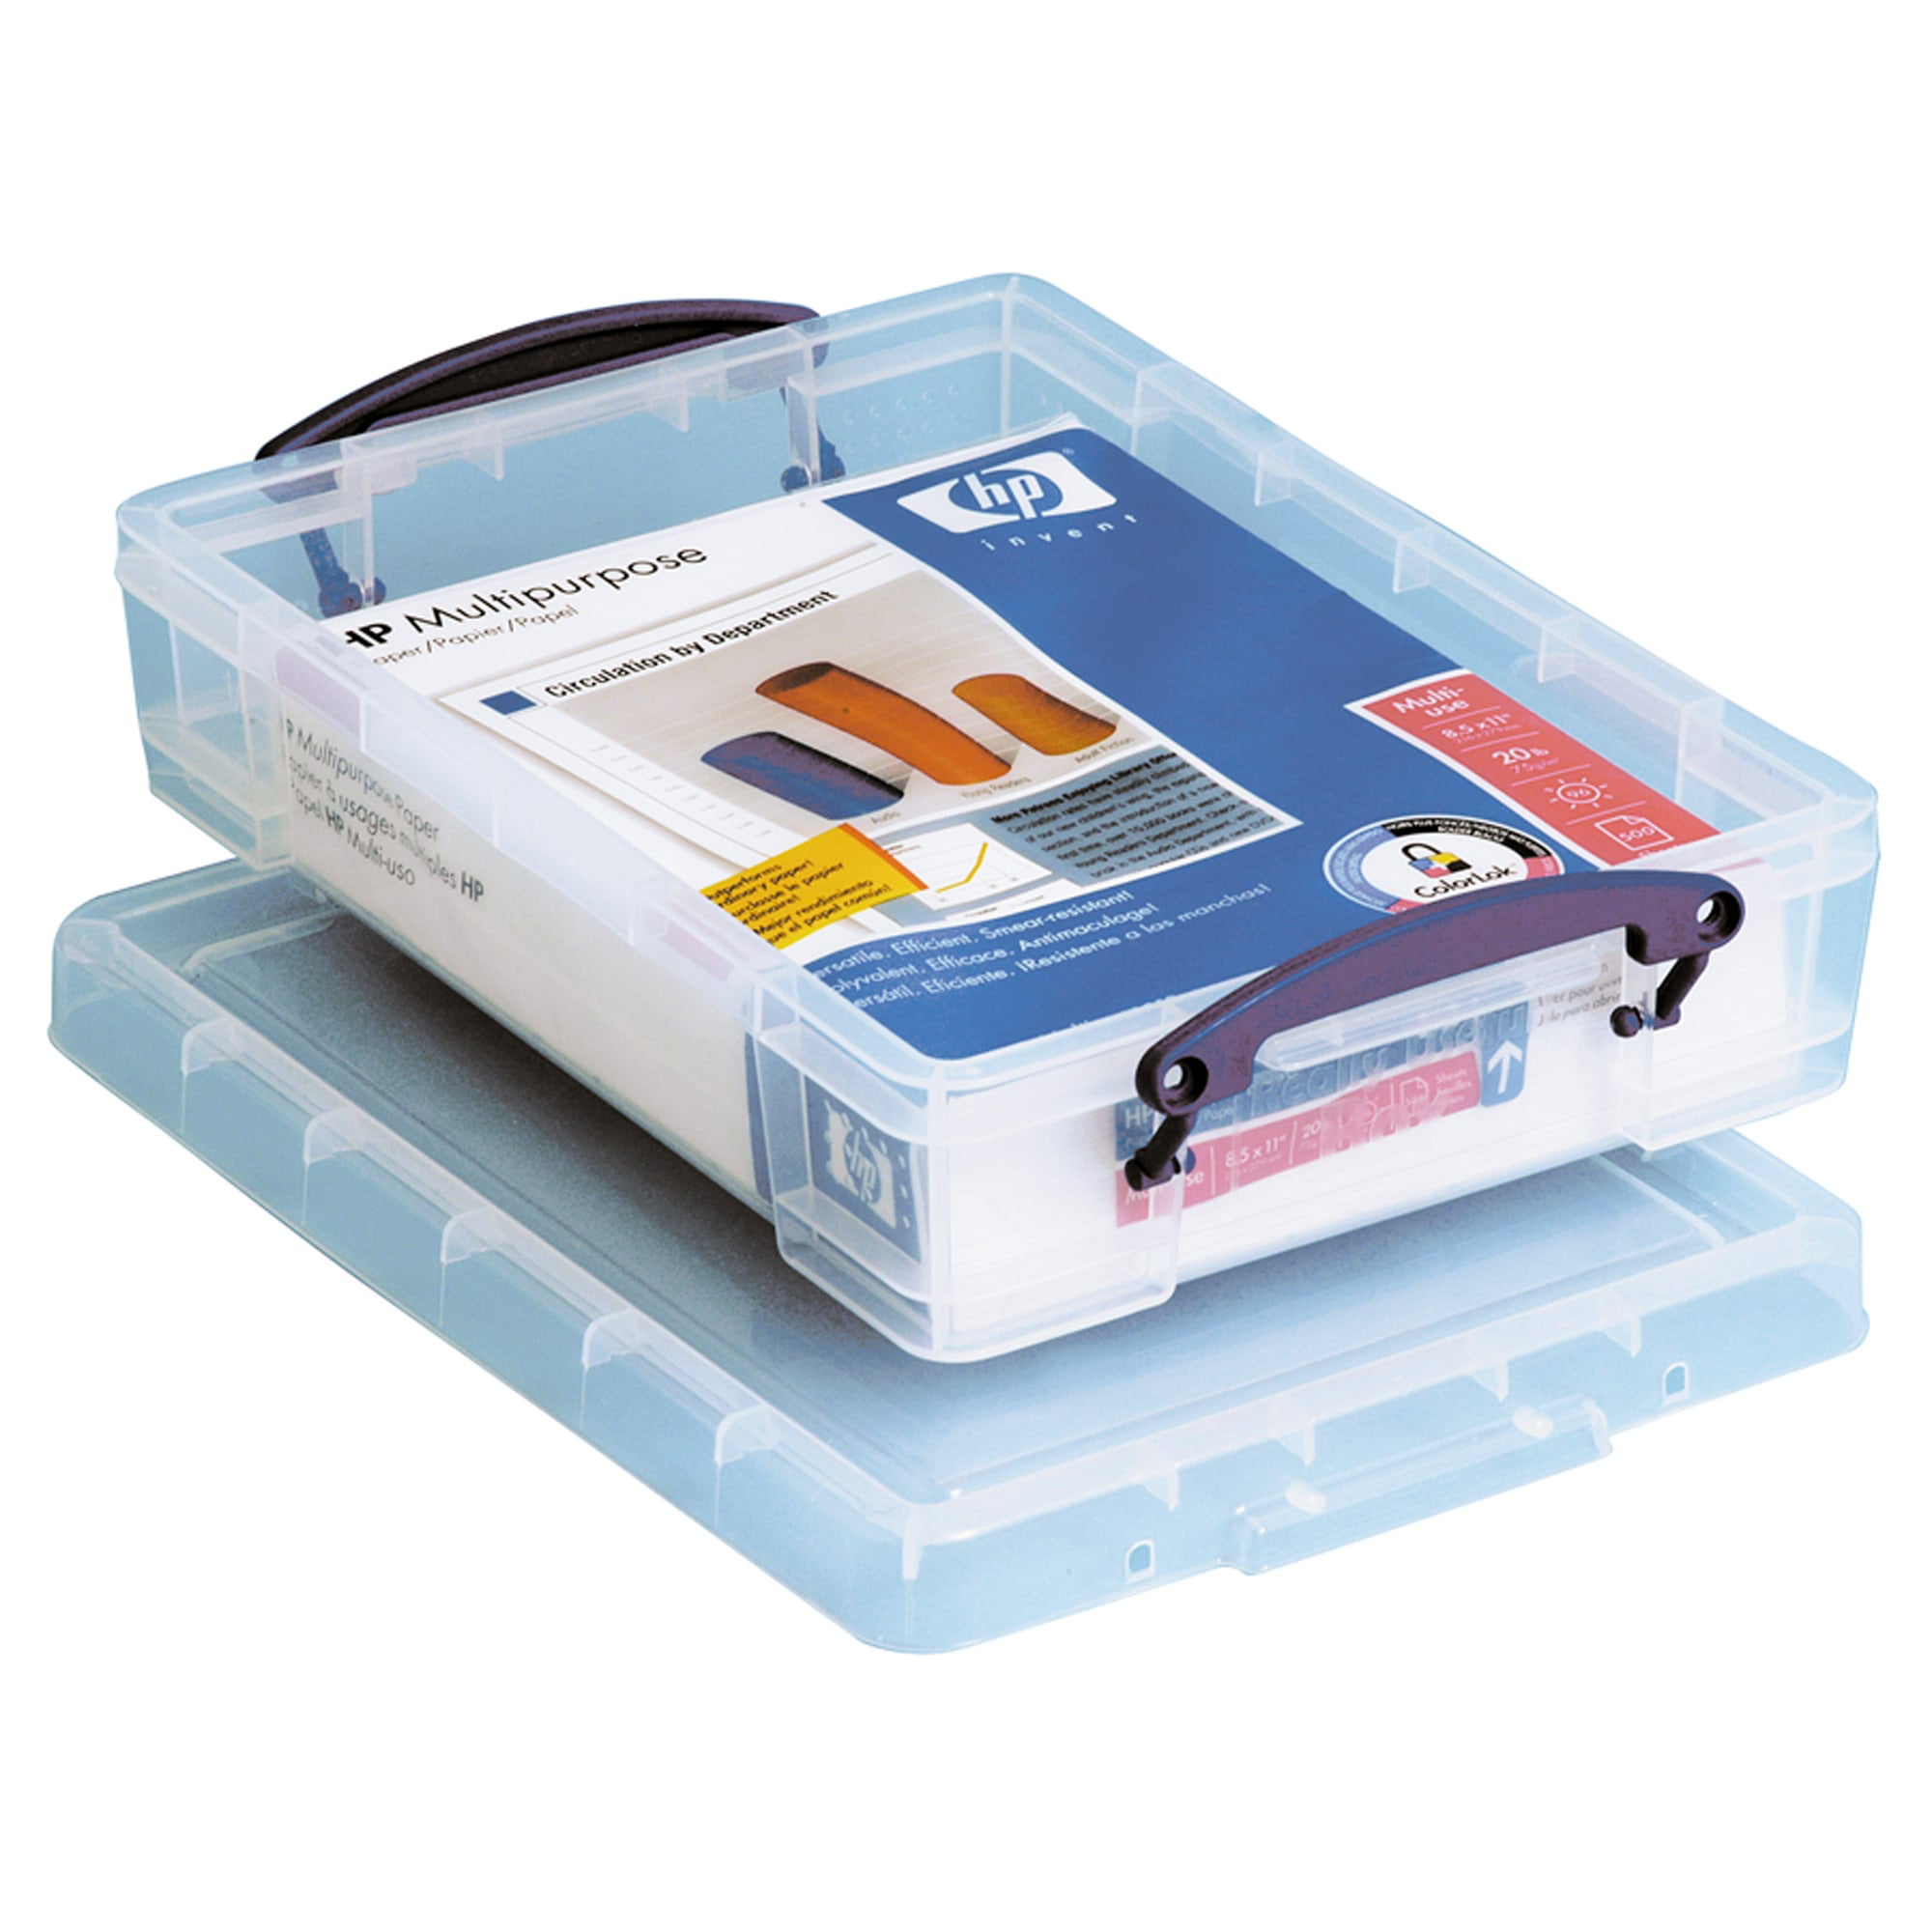 Plastic Organiser 5 section Box with A4 section 